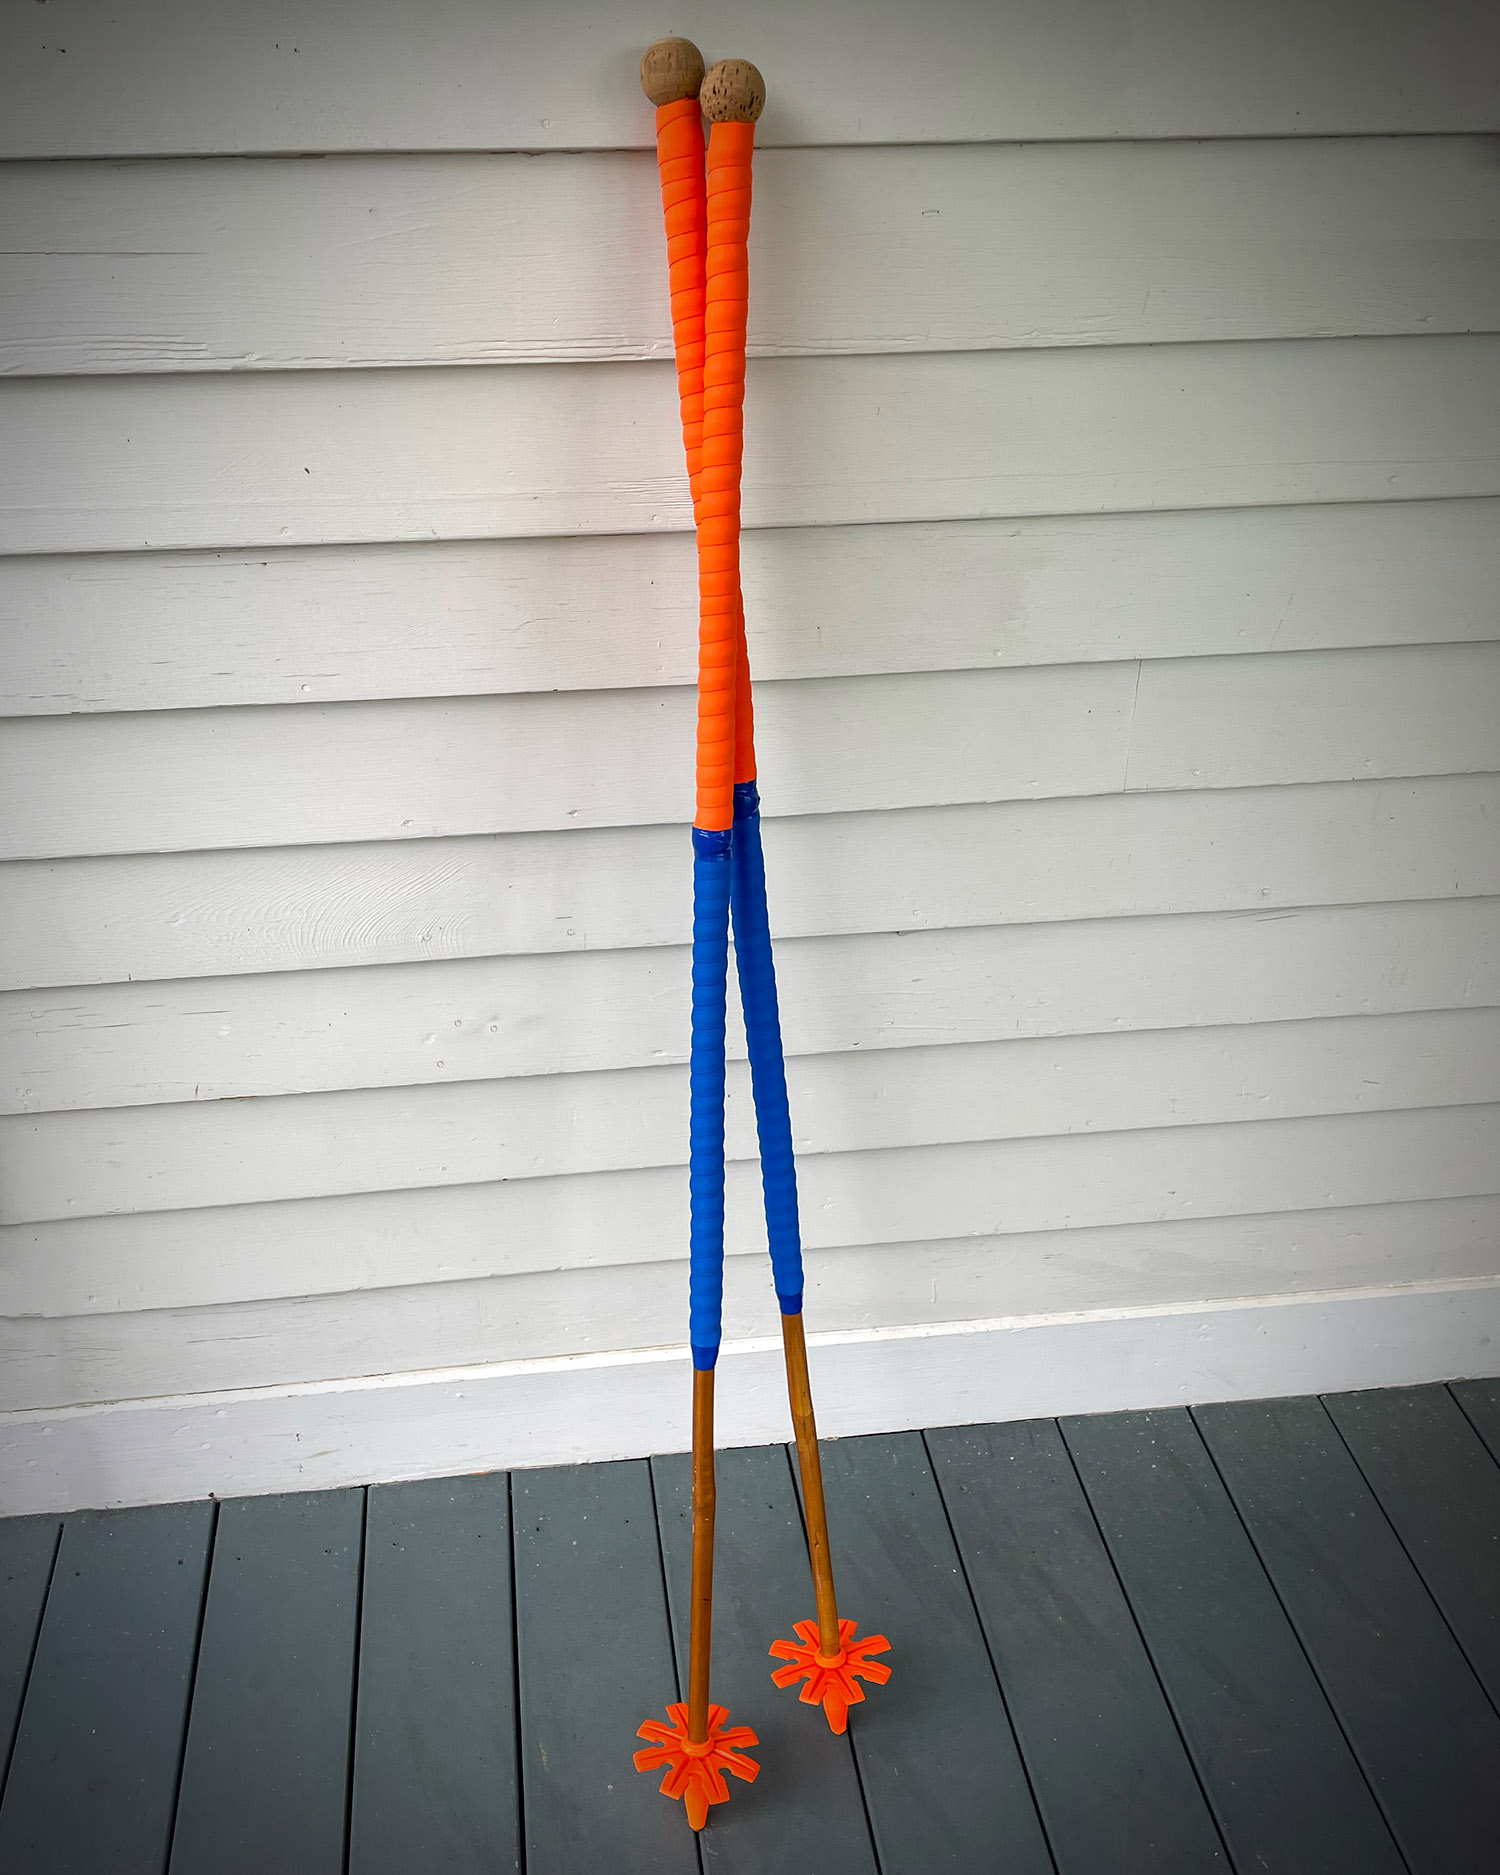 Jacon Mayer’s homemade ski touring poles, reusing the bamboo and tips from old cross-country poles.